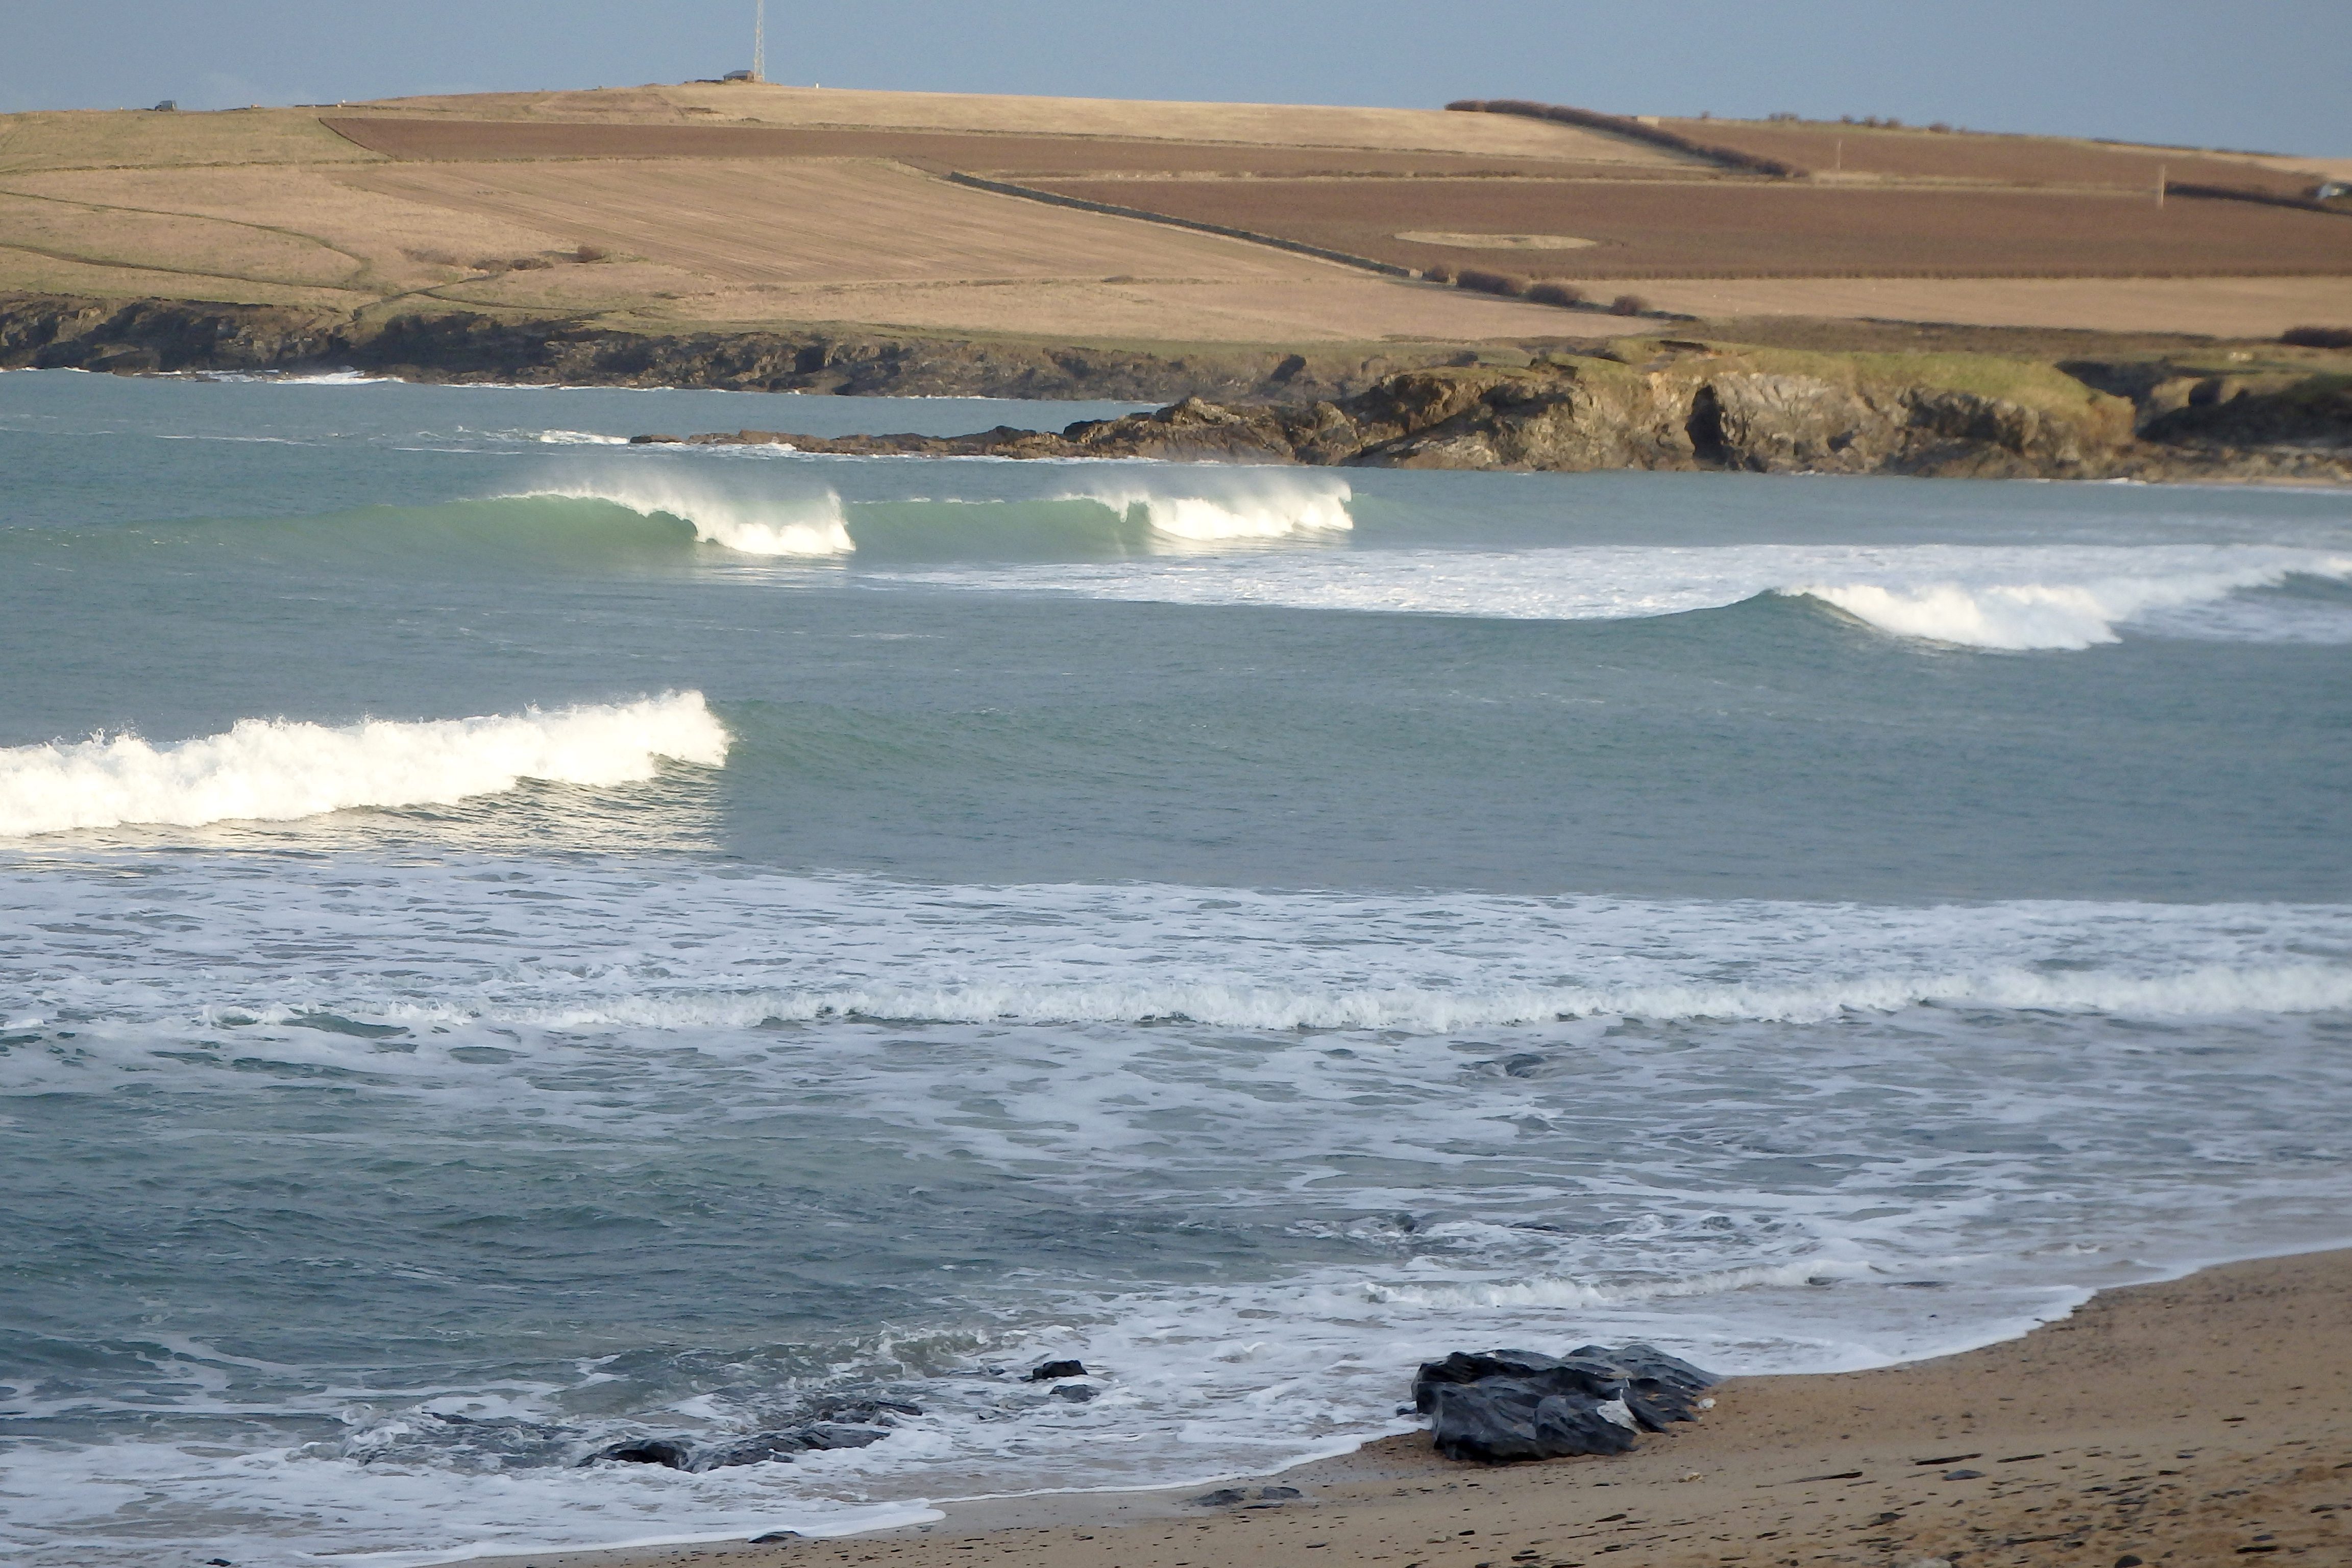 Surf Report for Monday 29th February 2016